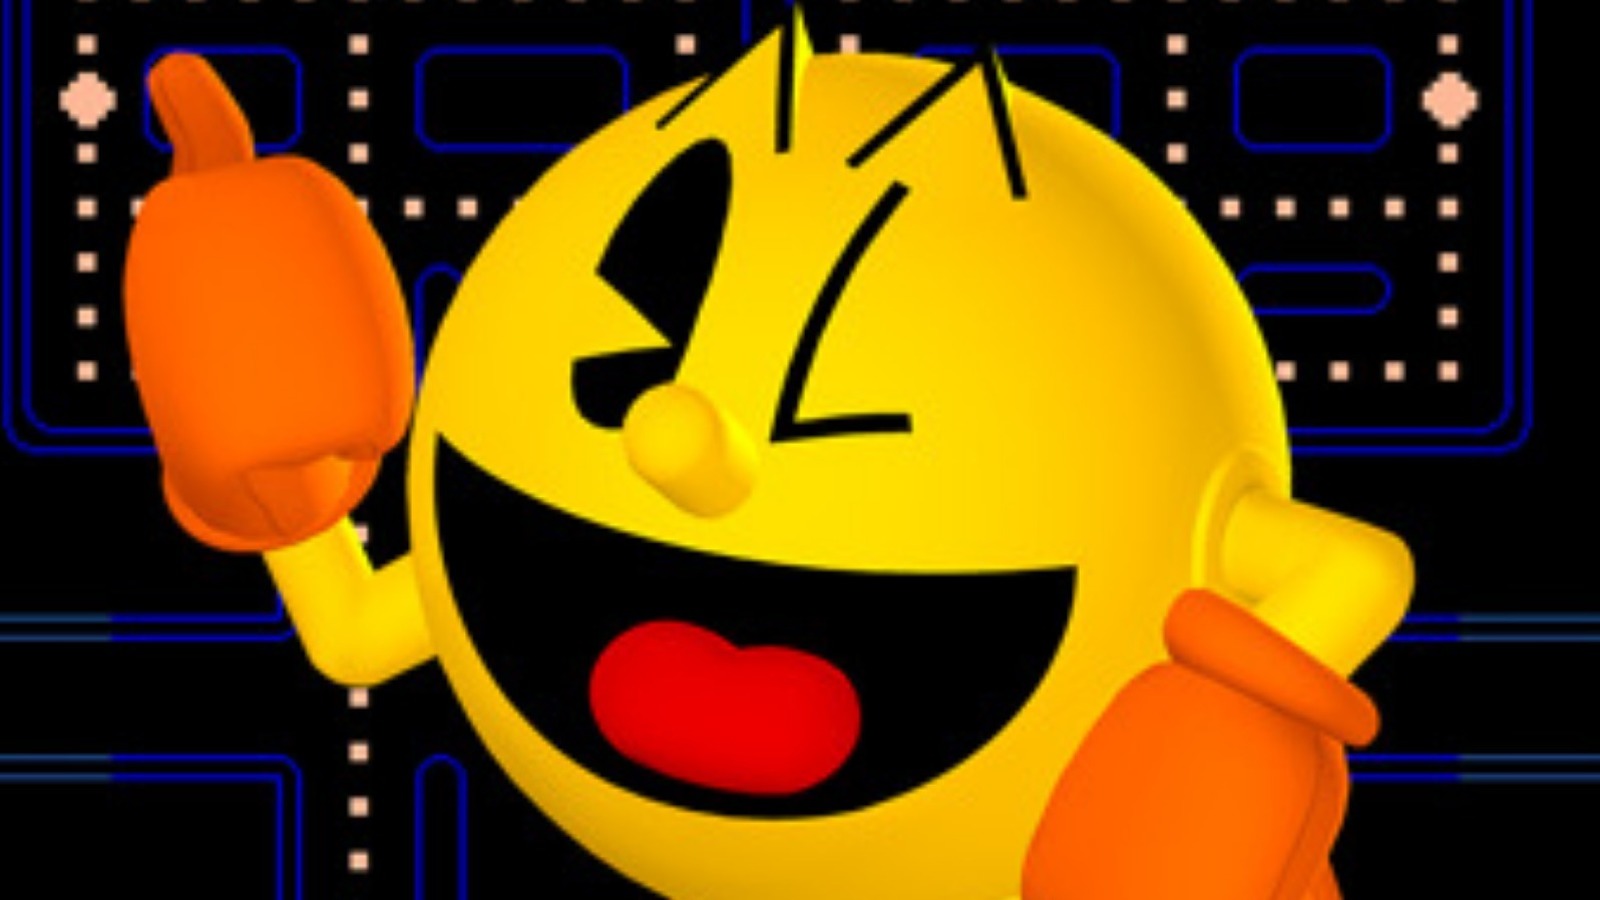 How Do the Ghosts in PAC-MAN Decide Where to Go?